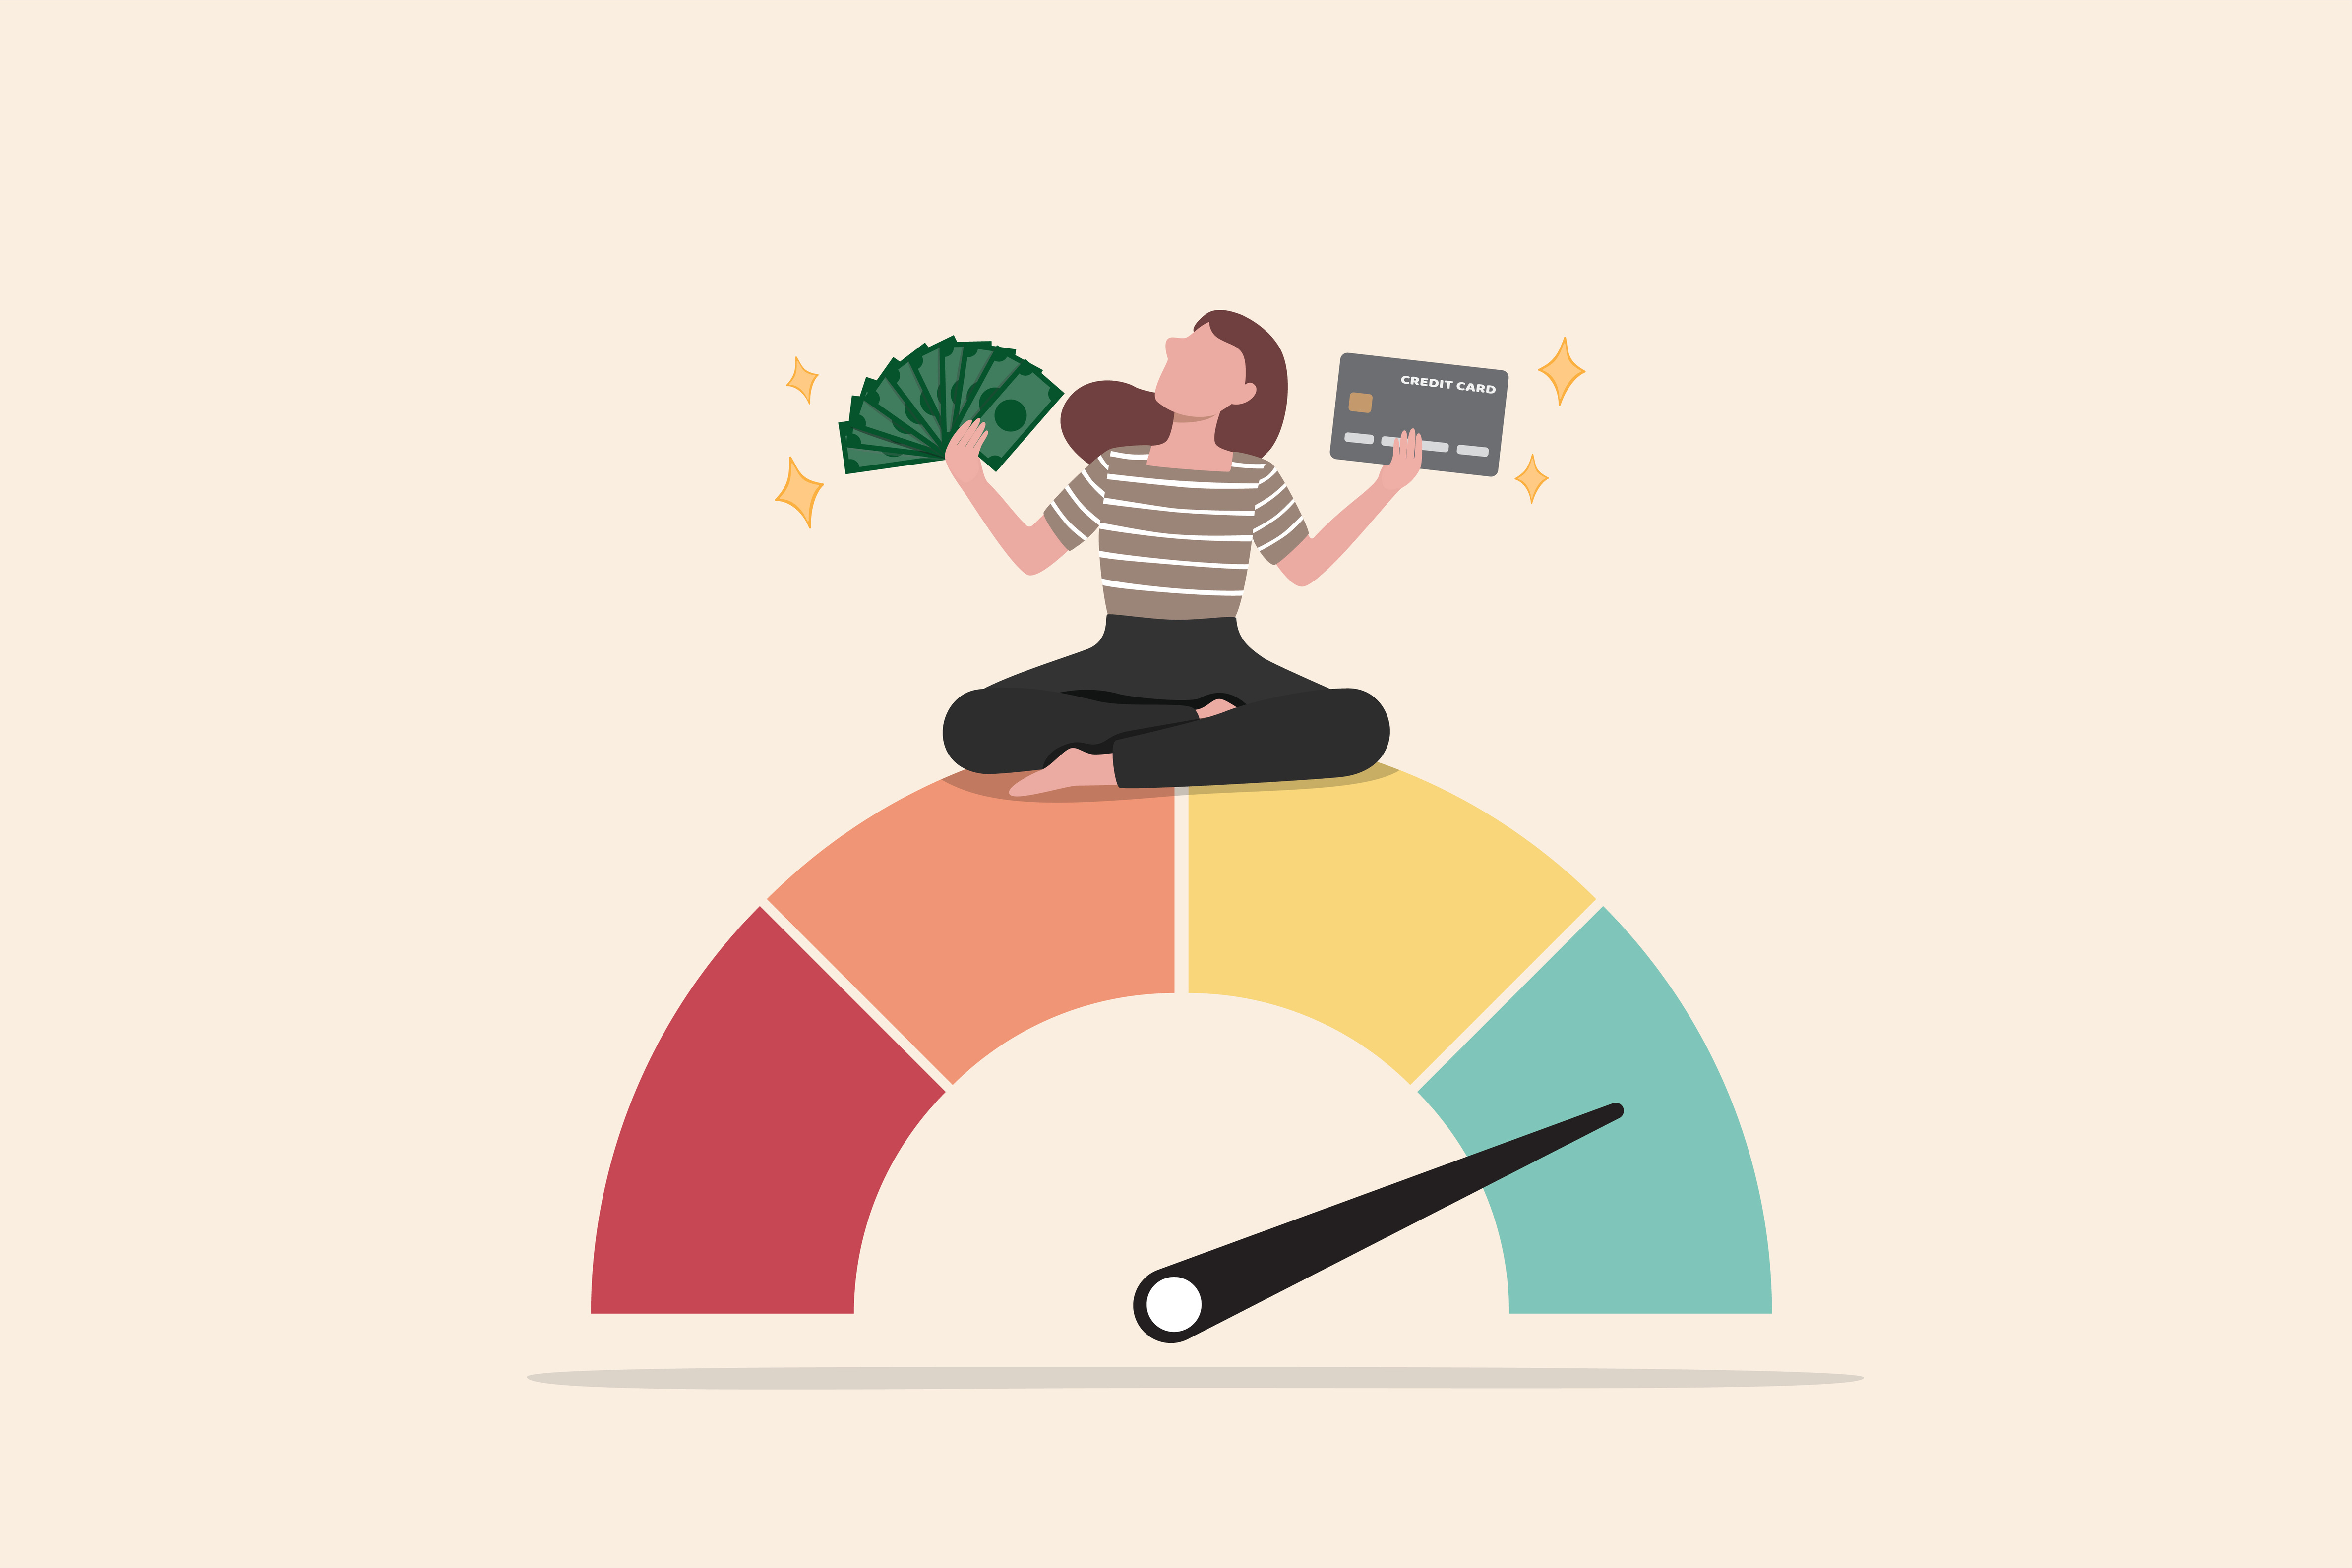 illustration of a person on top of a credit score meter holding money and a credit card